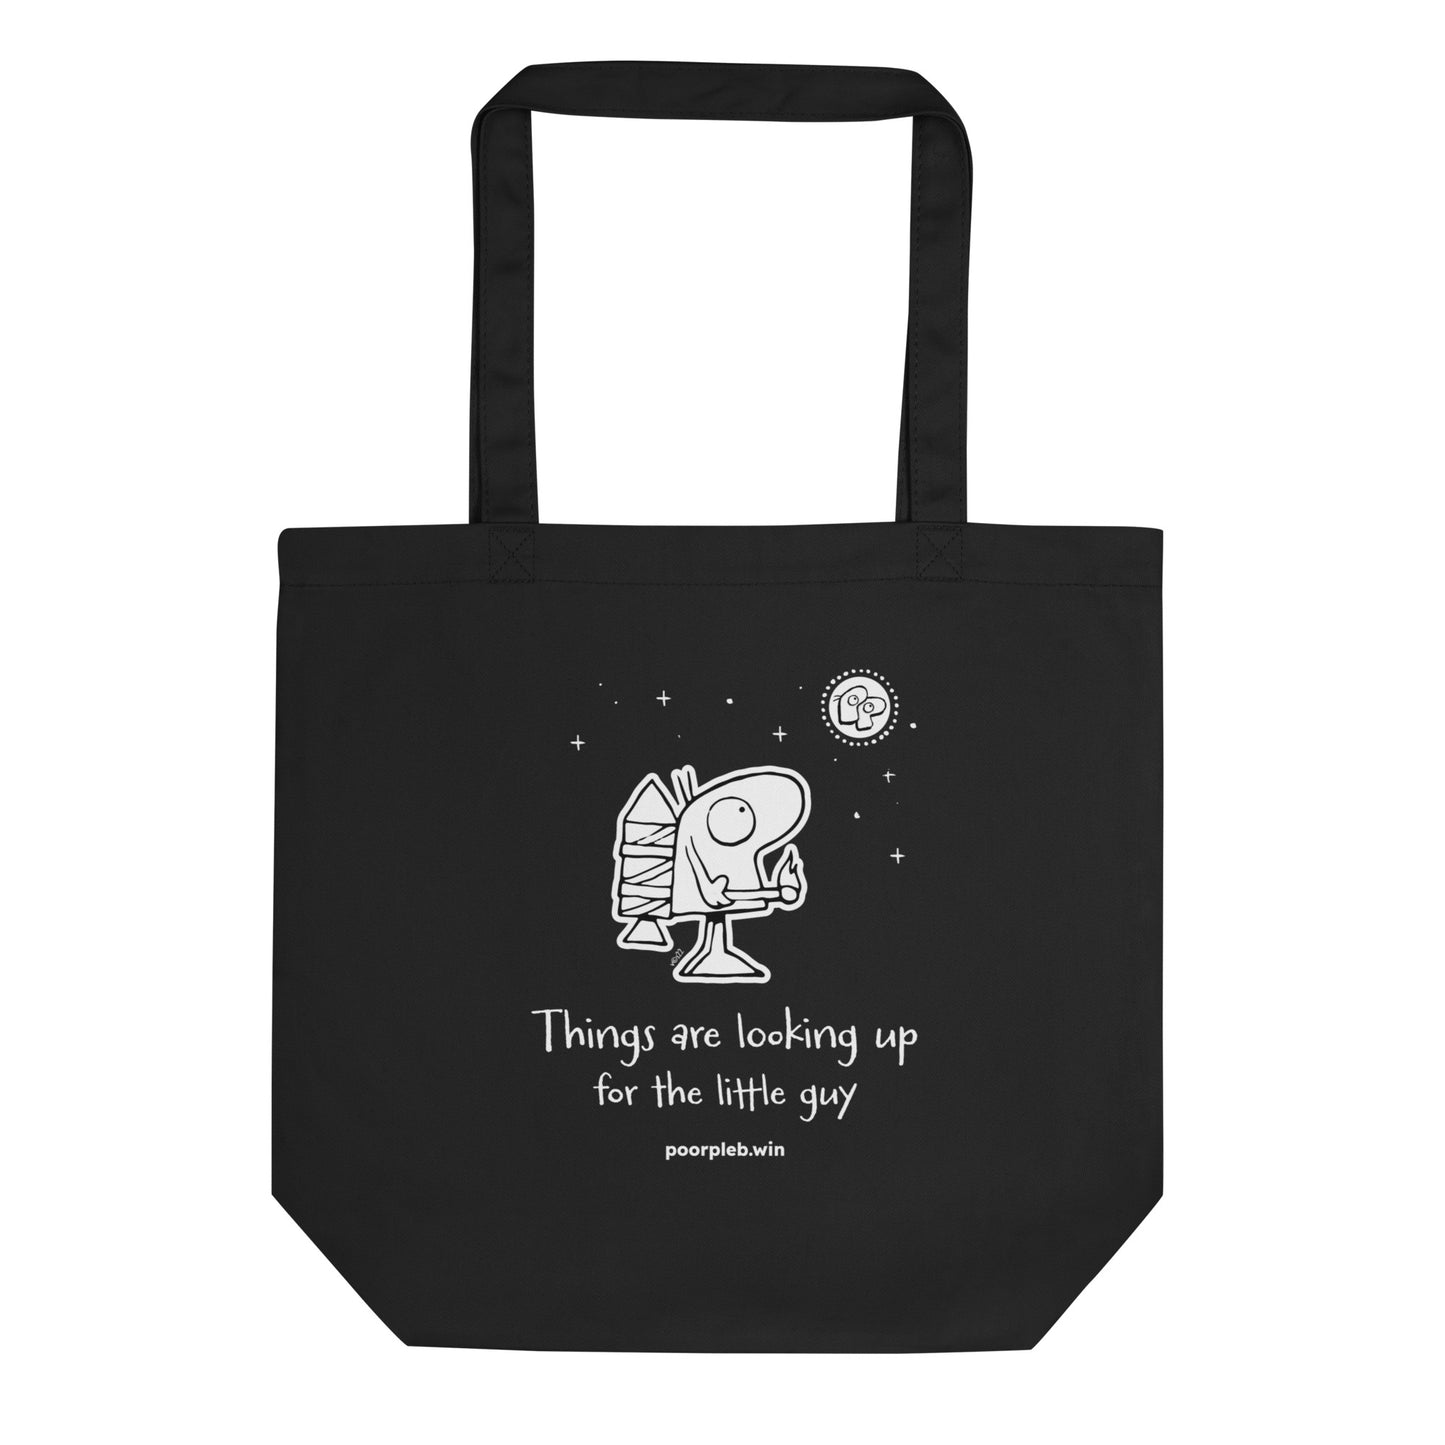 Poor Pleb Eco Tote Bag -Things are looking up for the little guy - Crypto Biskit